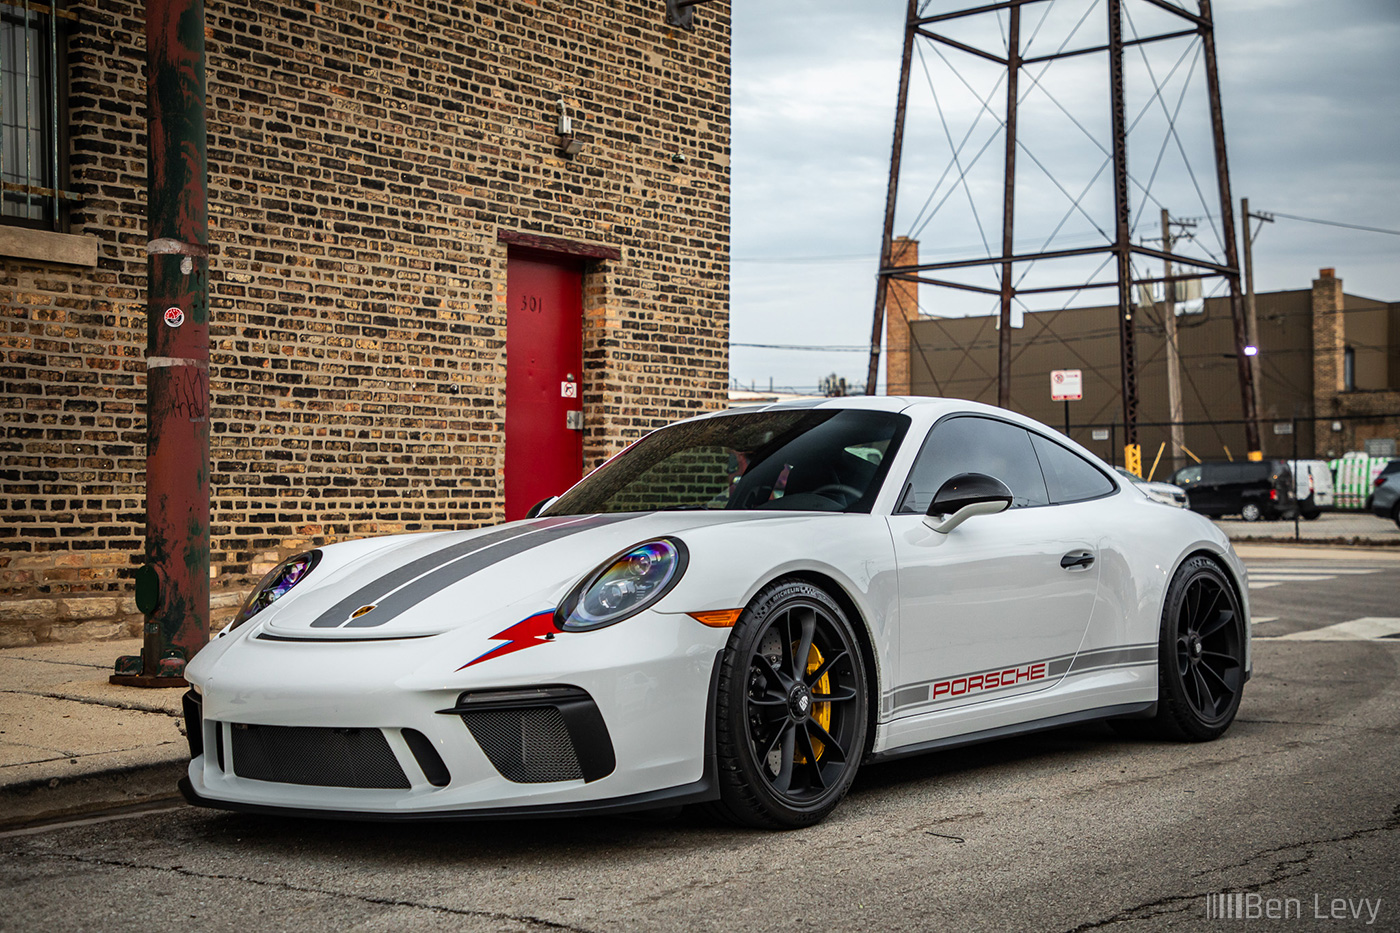 White Porsche 991 GT3 Touring inspired by Bowie